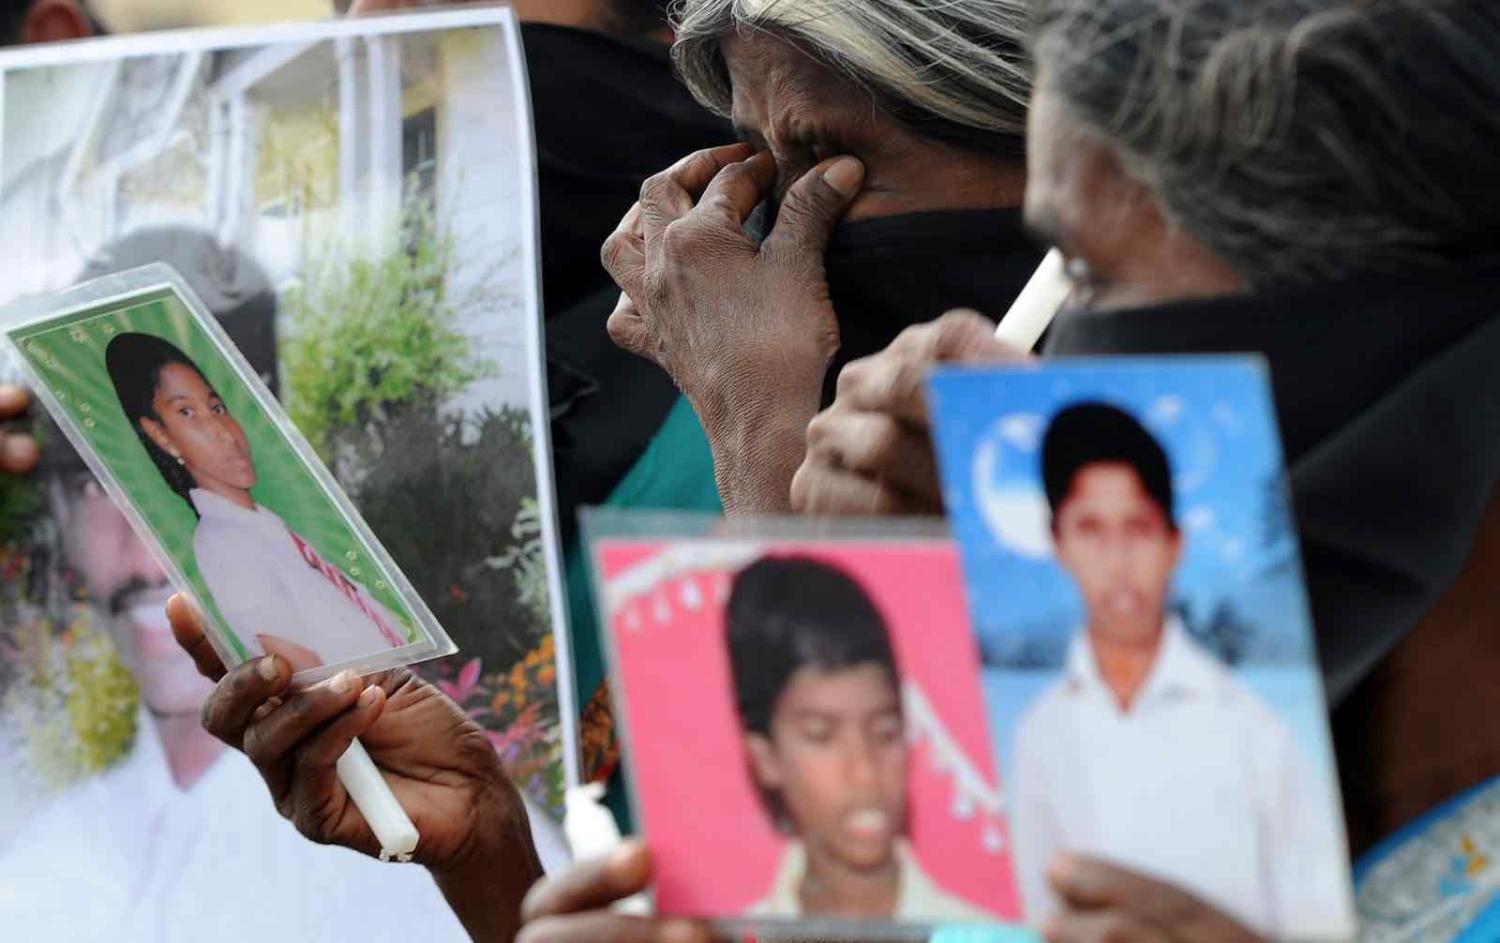 Sri Lankan Tamil mothers from the “Dead and Missing Person’s Parents” group hold photographs in Jaffna, November 2013 (Photo: Lakruwan Wanniarachchi via Getty)